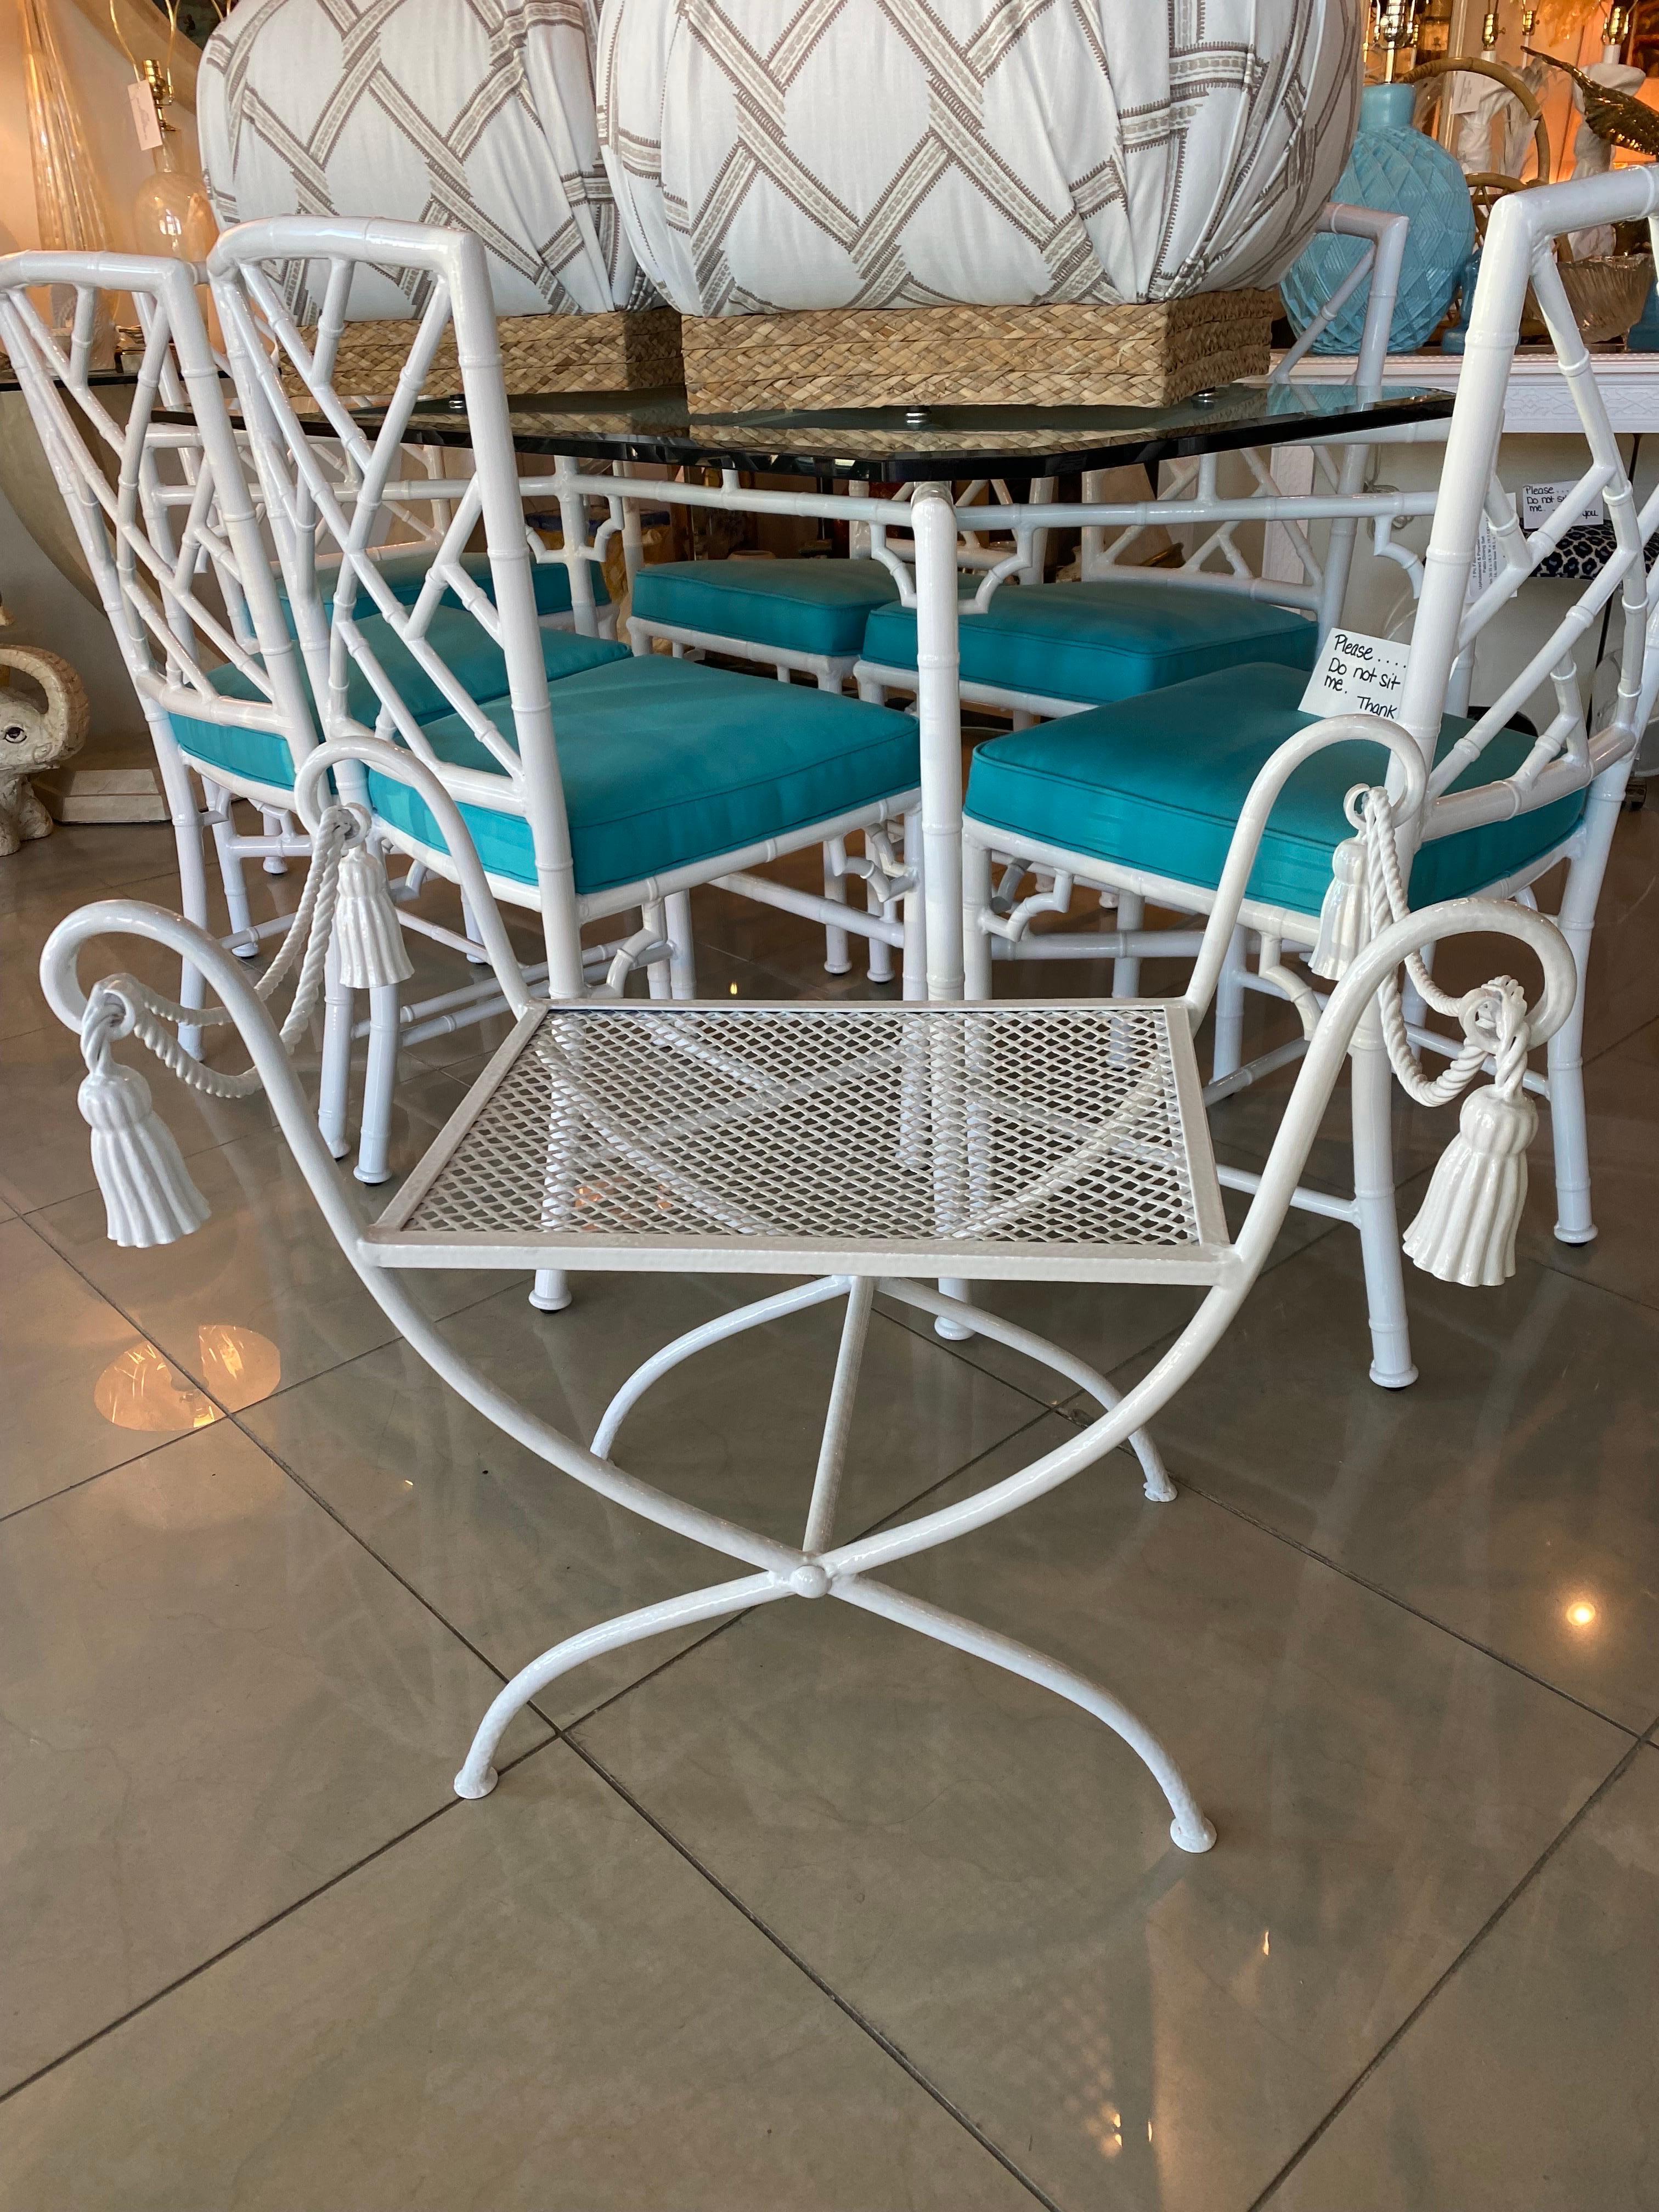 Vintage metal Italian tole bench with tassels. Newly powder-coated in a. fresh white. This can be used indoors, outdoors or patio. If you would like an additional shipping quote please contact me. Dimensions: 24 H x 16 D x 29.5 W x Seat Height 16.5.